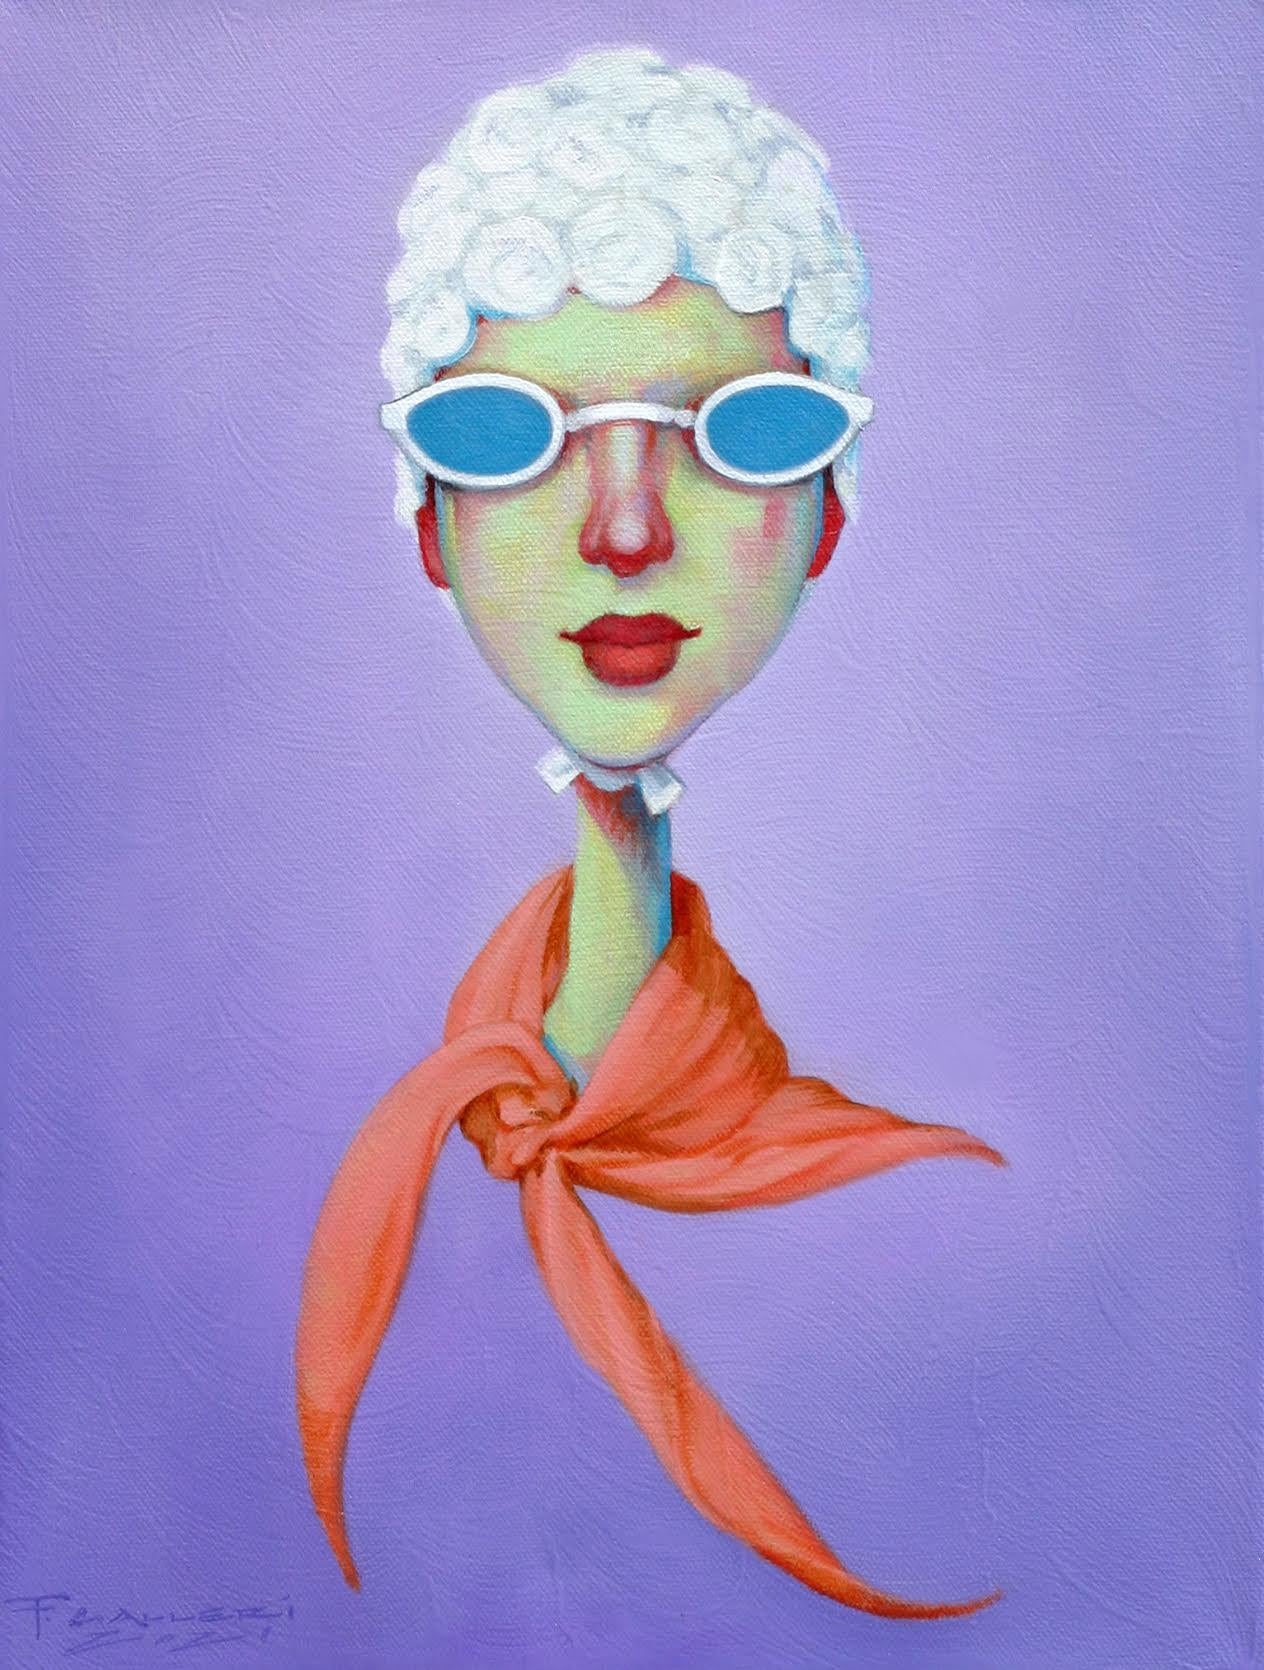 Fred Calleri Figurative Painting - "Karma Chameleon" oil painting of a girl in white hat, vintage glasses, & scarf